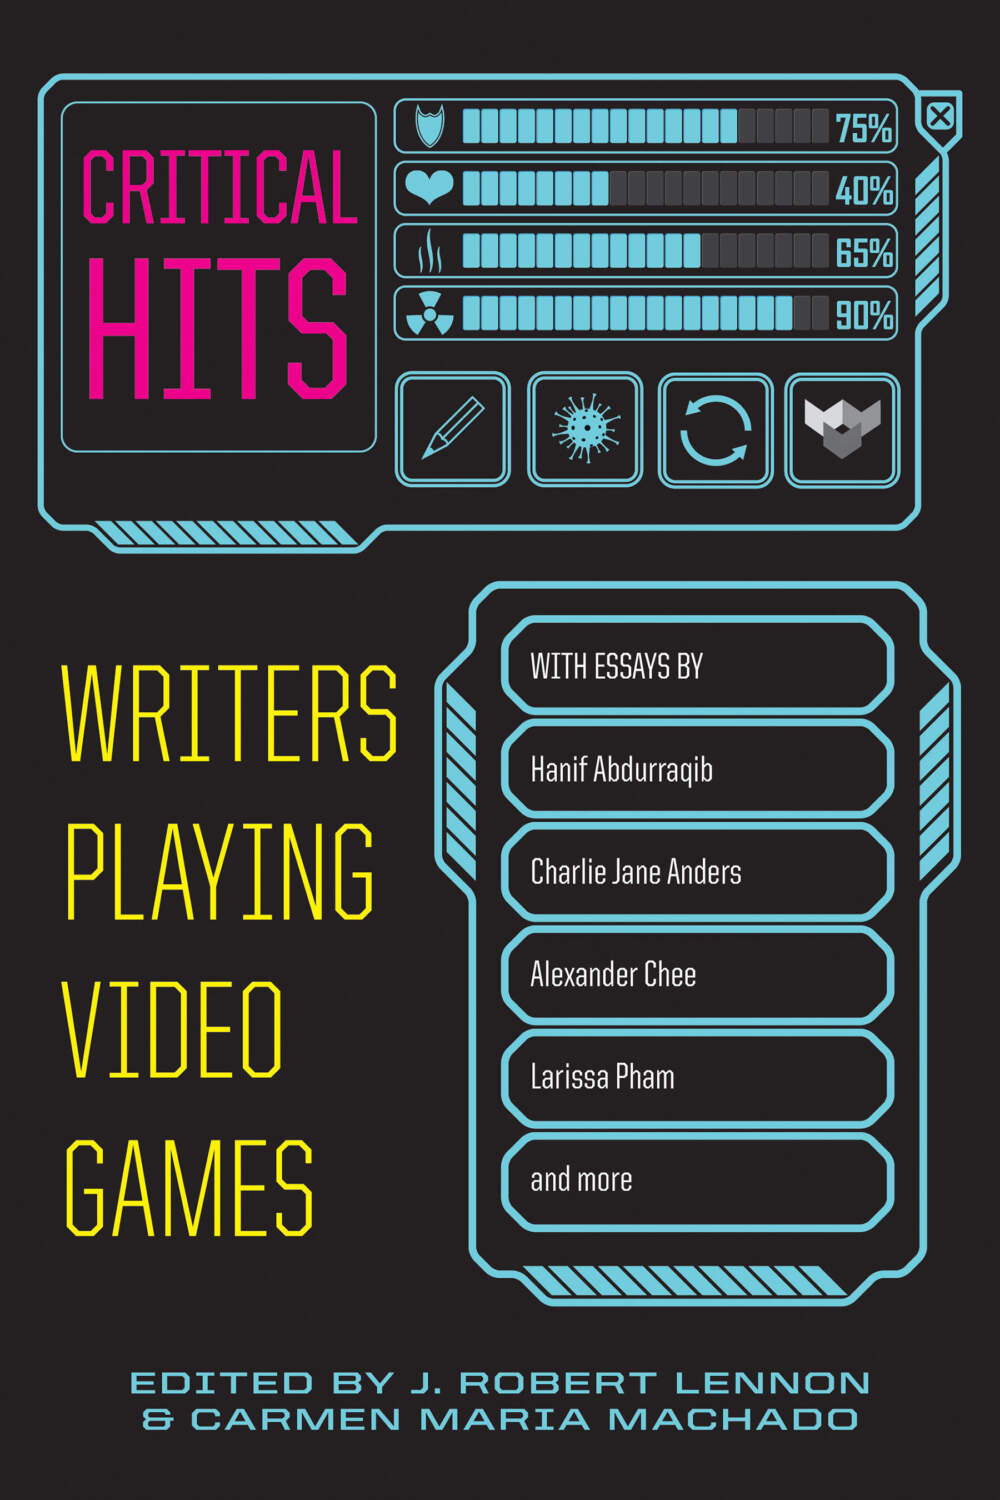 The cover of "Critical Hits: Writers Play Video Games." (Courtesy)